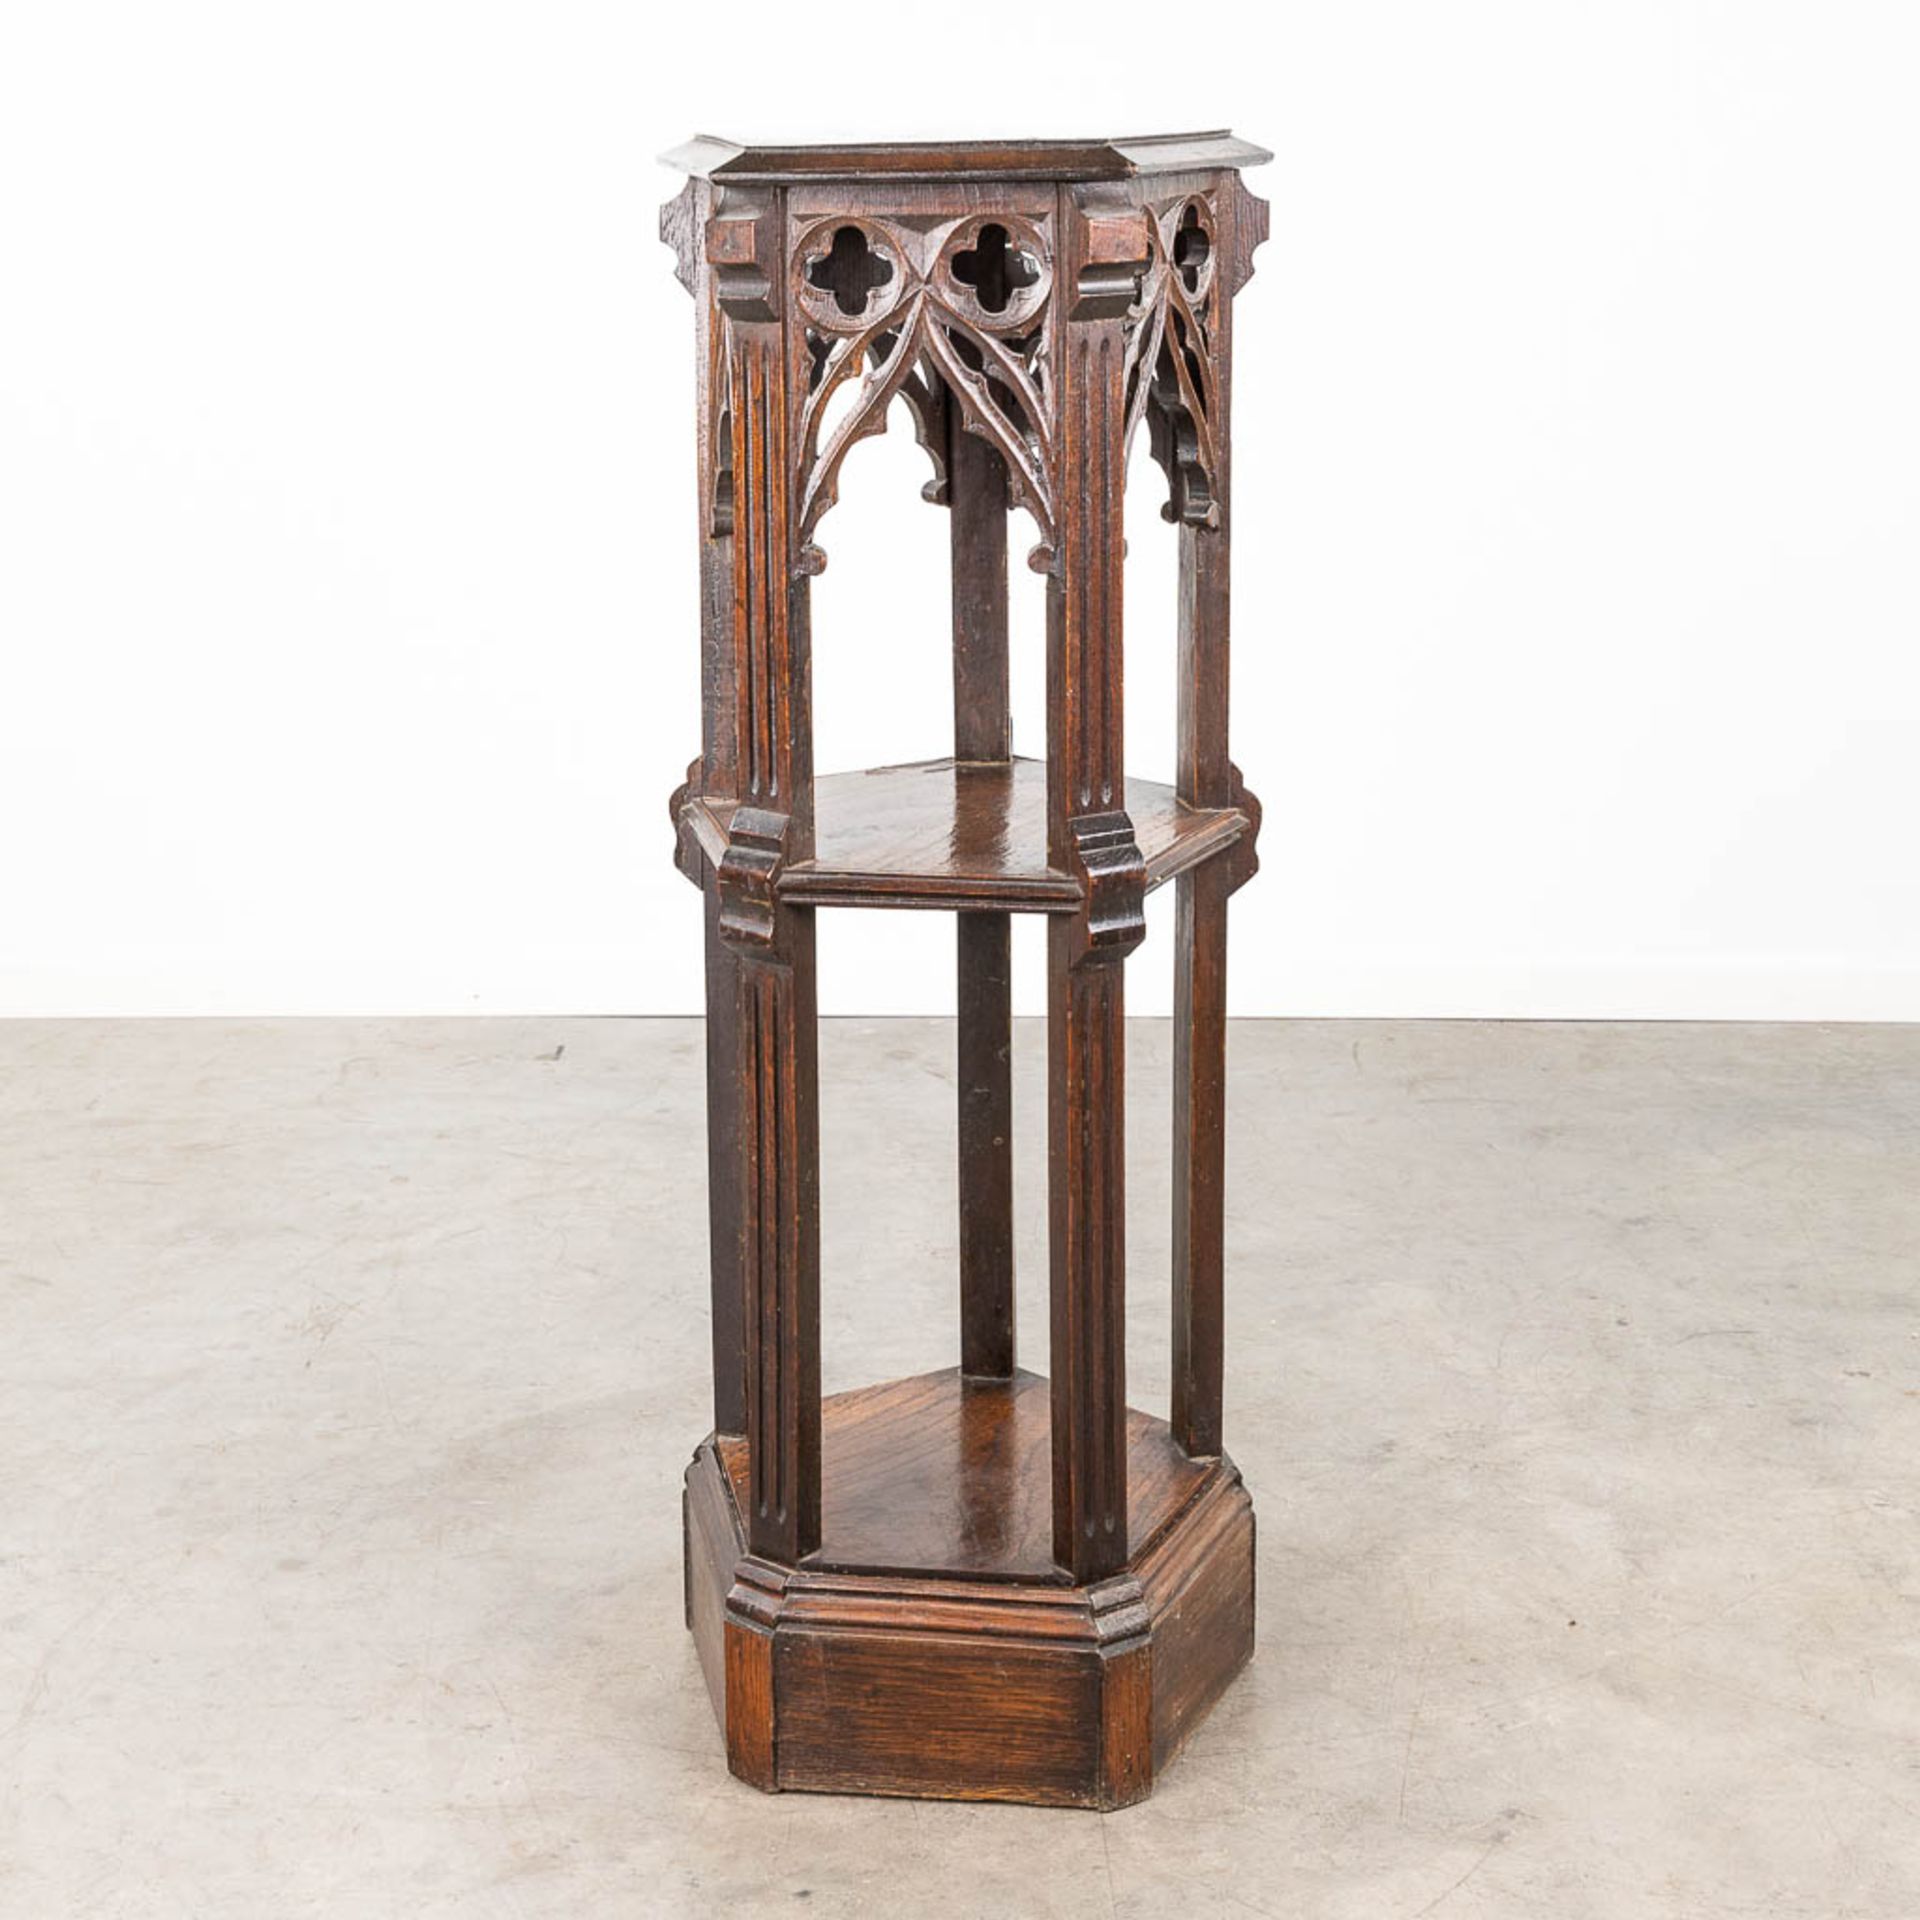 A pentagram pedestal, sculptured wood in Gothic Revival style. 19th C. (L: 41 x W: 46 x H: 111 cm) - Image 6 of 12